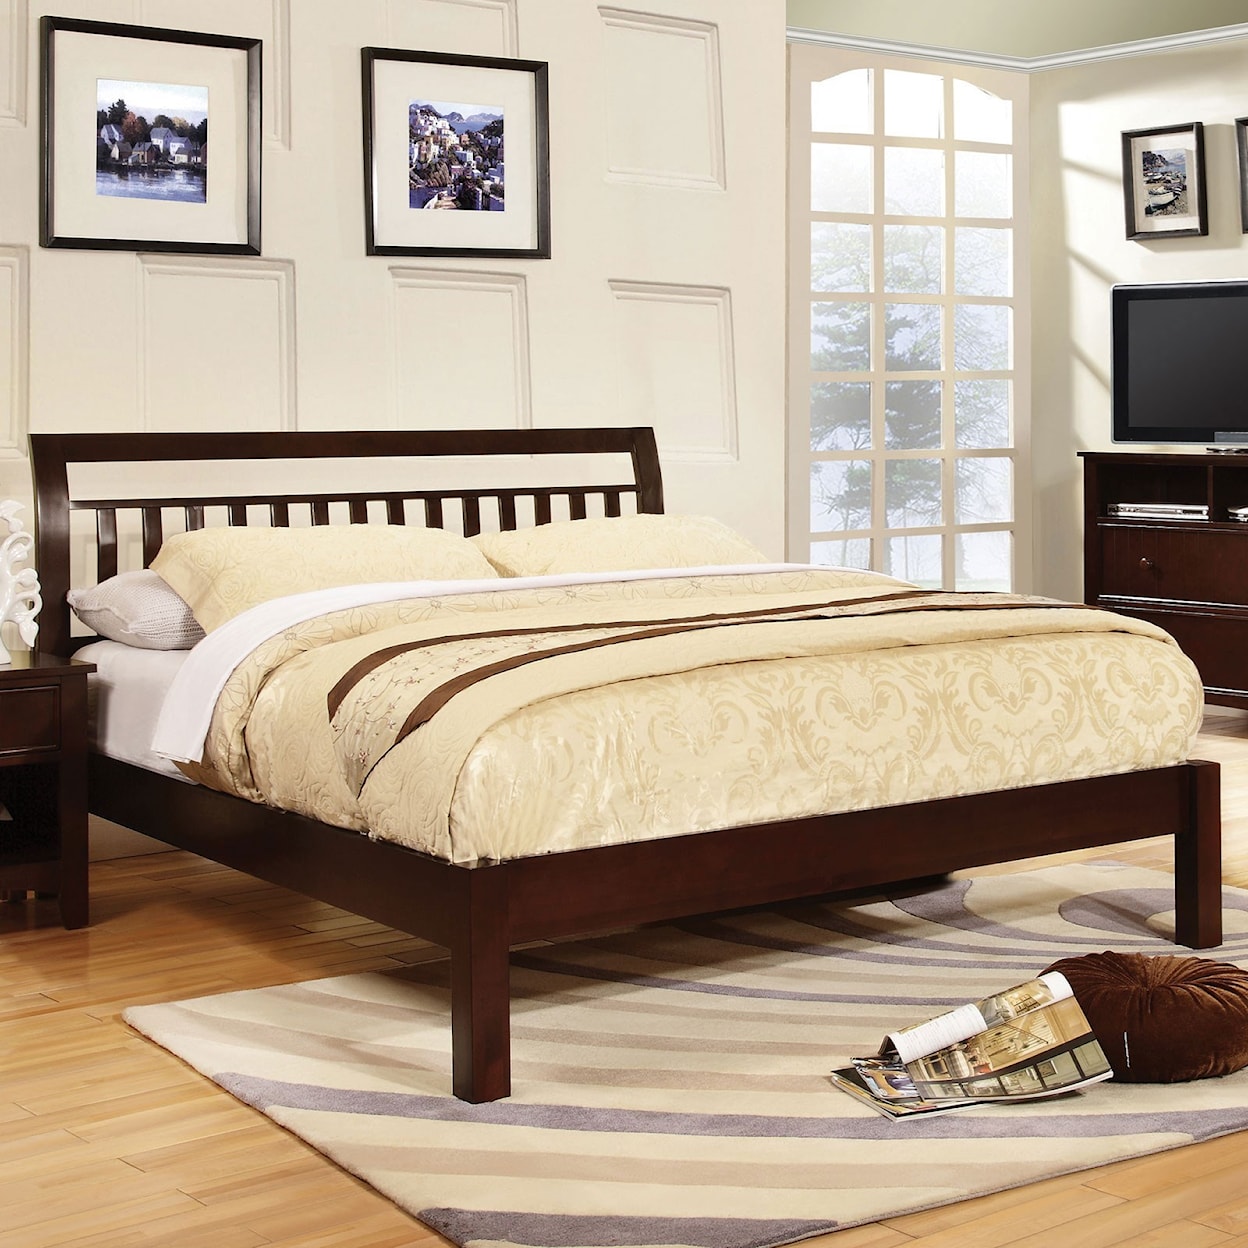 Furniture of America Corry Queen Sleigh Bed